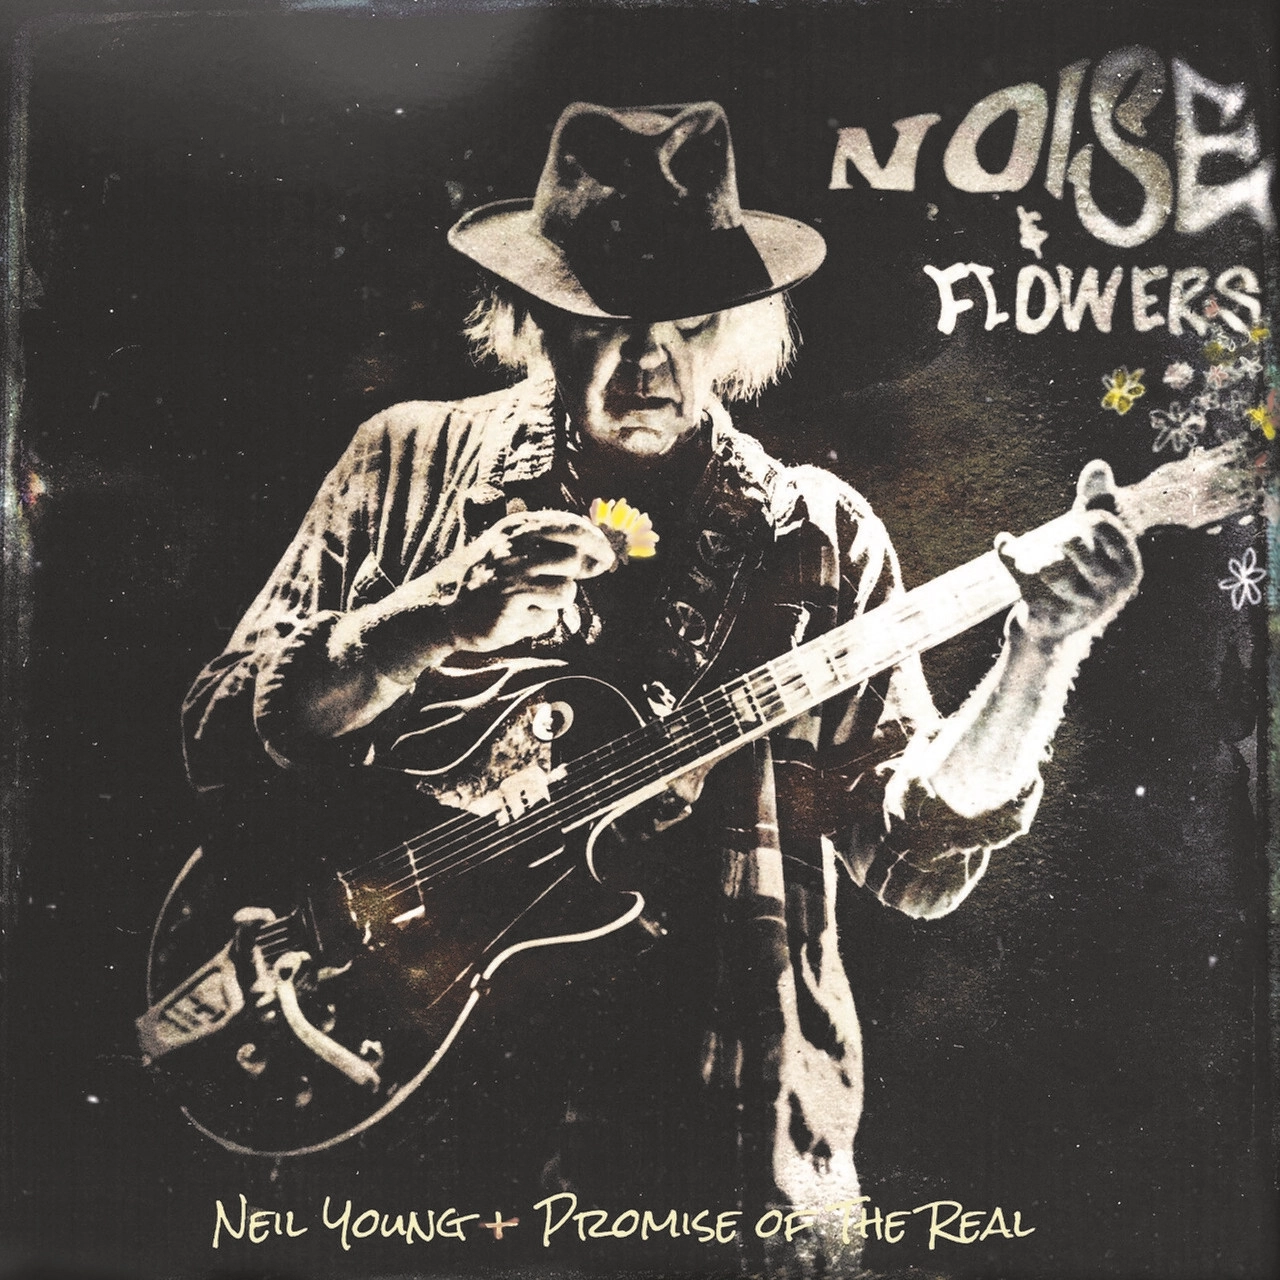 Neil Young + Promise of the Real - Noise & Flowers